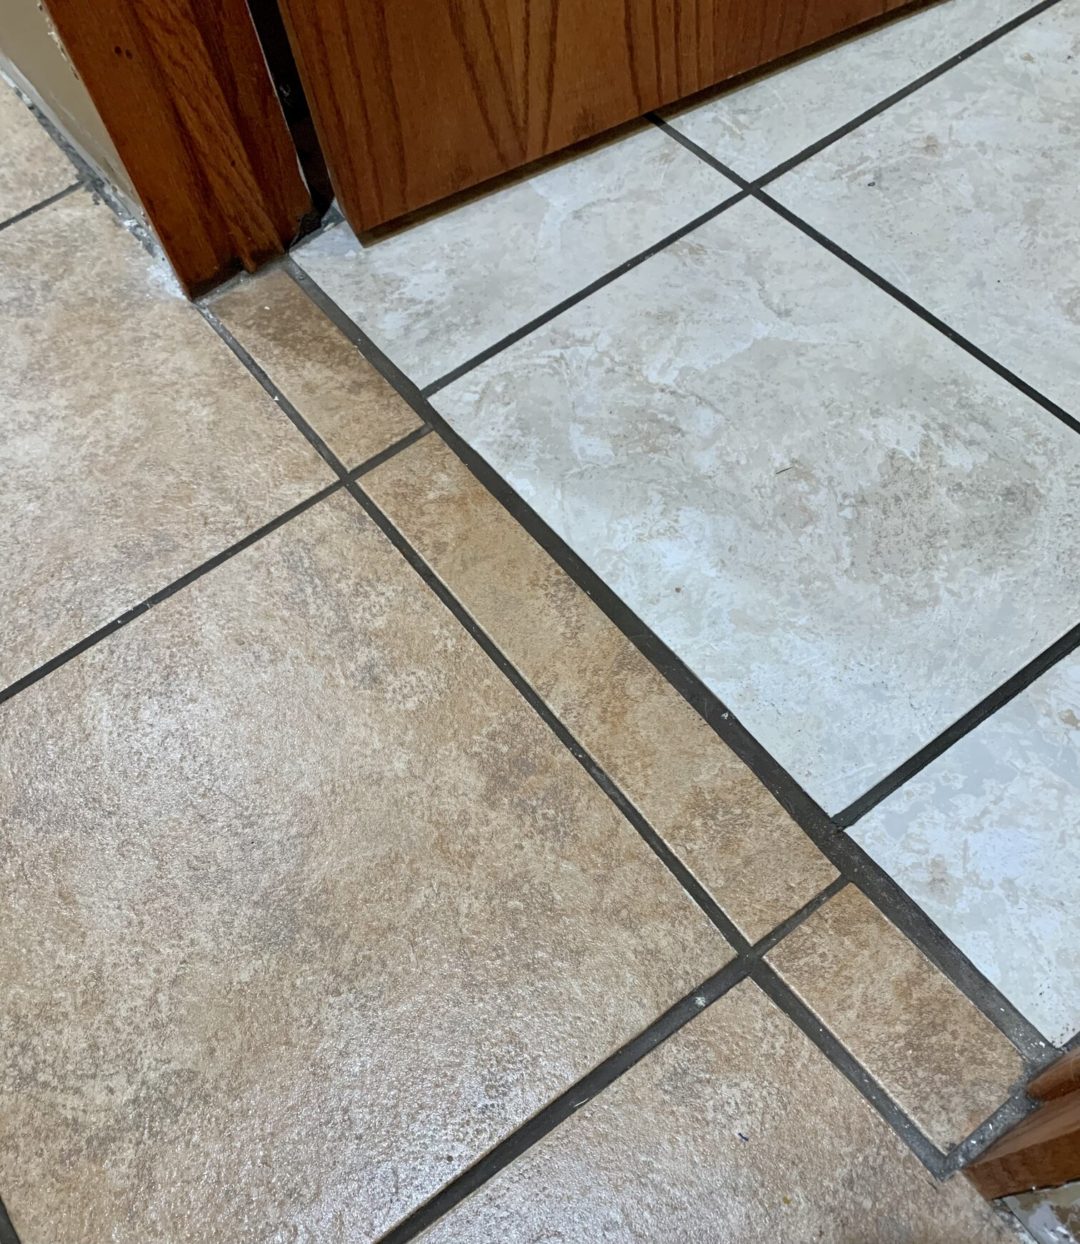 Wavy grout lines, peel-n-stick vinyl tile, oh my! ugly floor contest entry photo